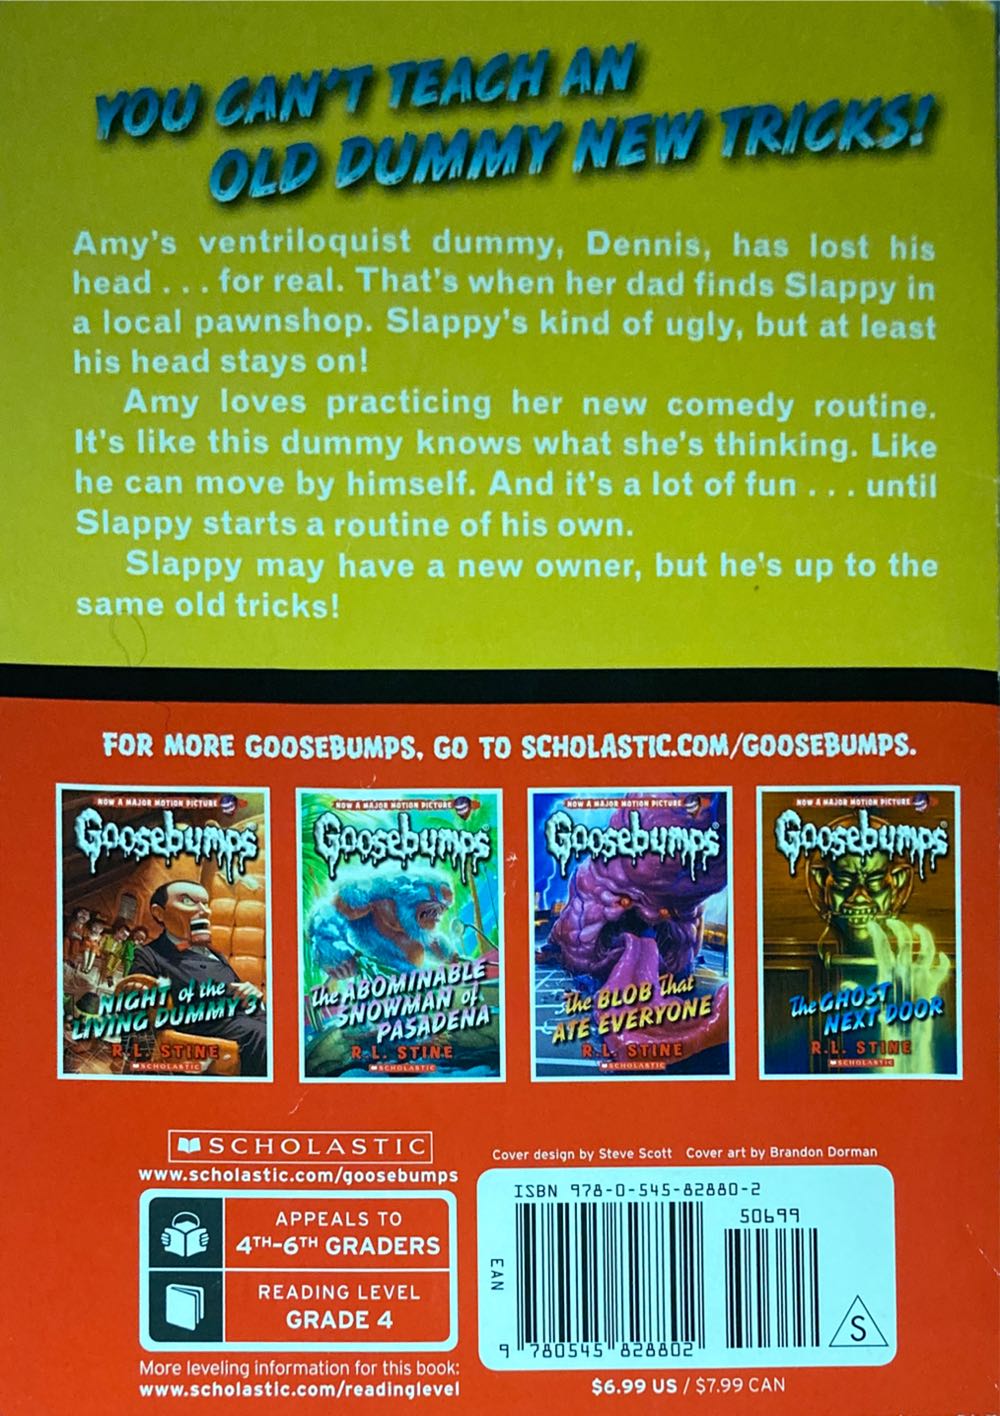 Goosebumps: Night Of The Living Dummy 2 - R. L. Stine (Scholastic Inc.  - Paperback) book collectible [Barcode 9780545828802] - Main Image 2